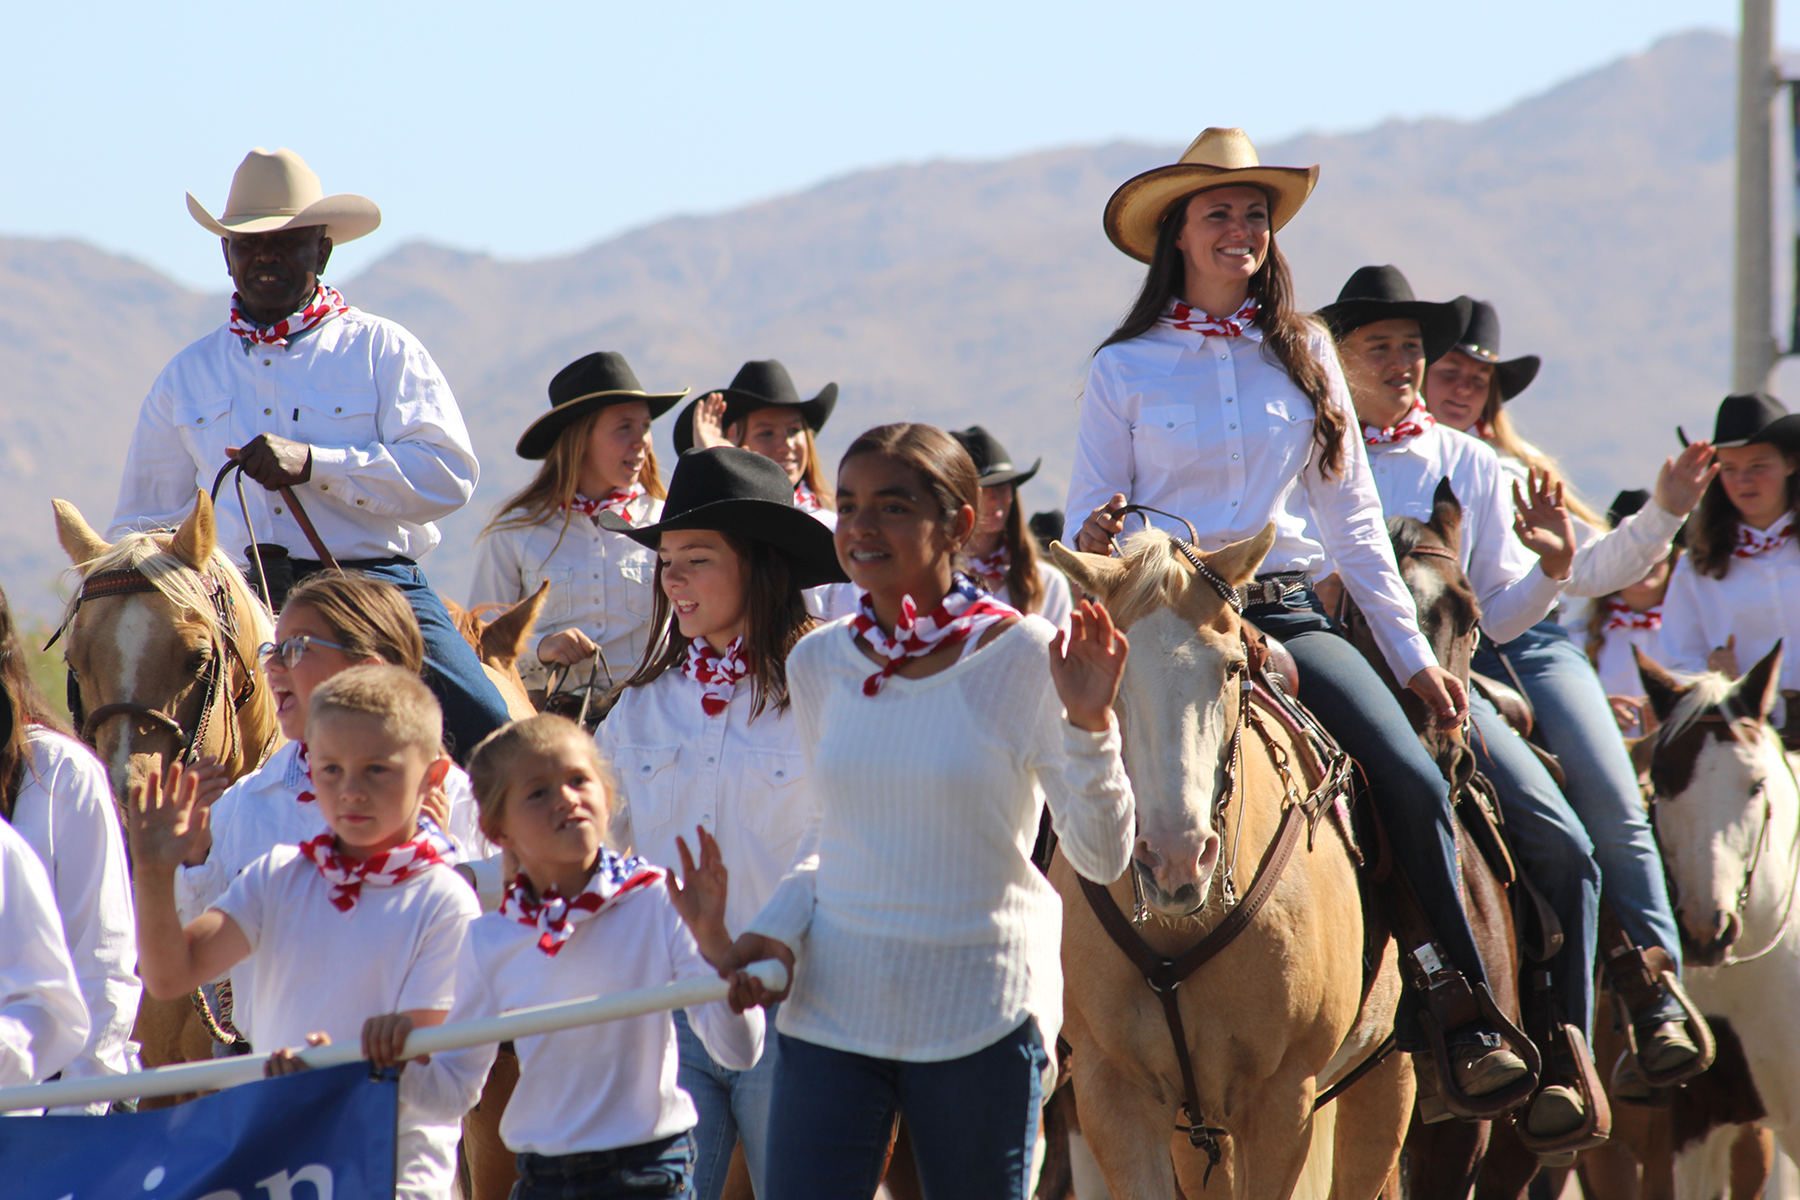 Happy Trails Parade Winners Announced! The Village in Apple Valley